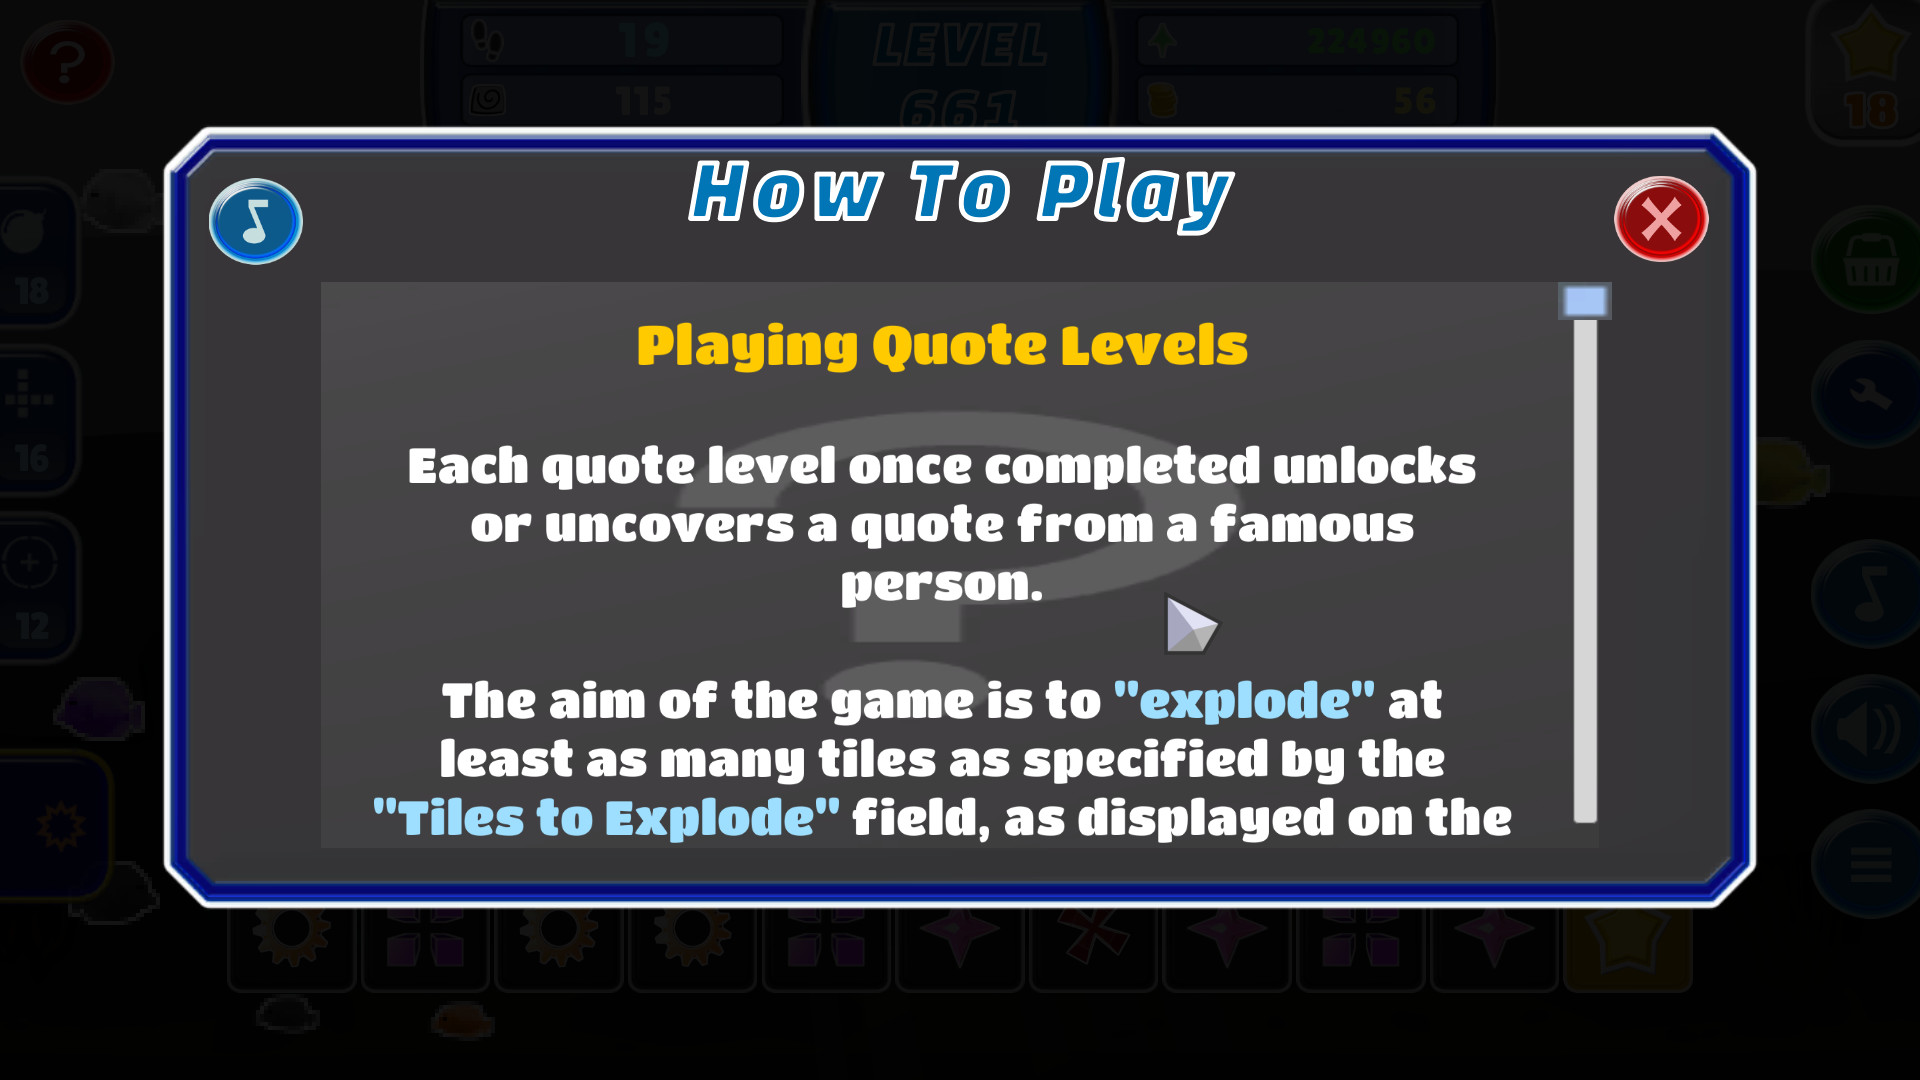 Quotes Quest - Match 3 Free Download